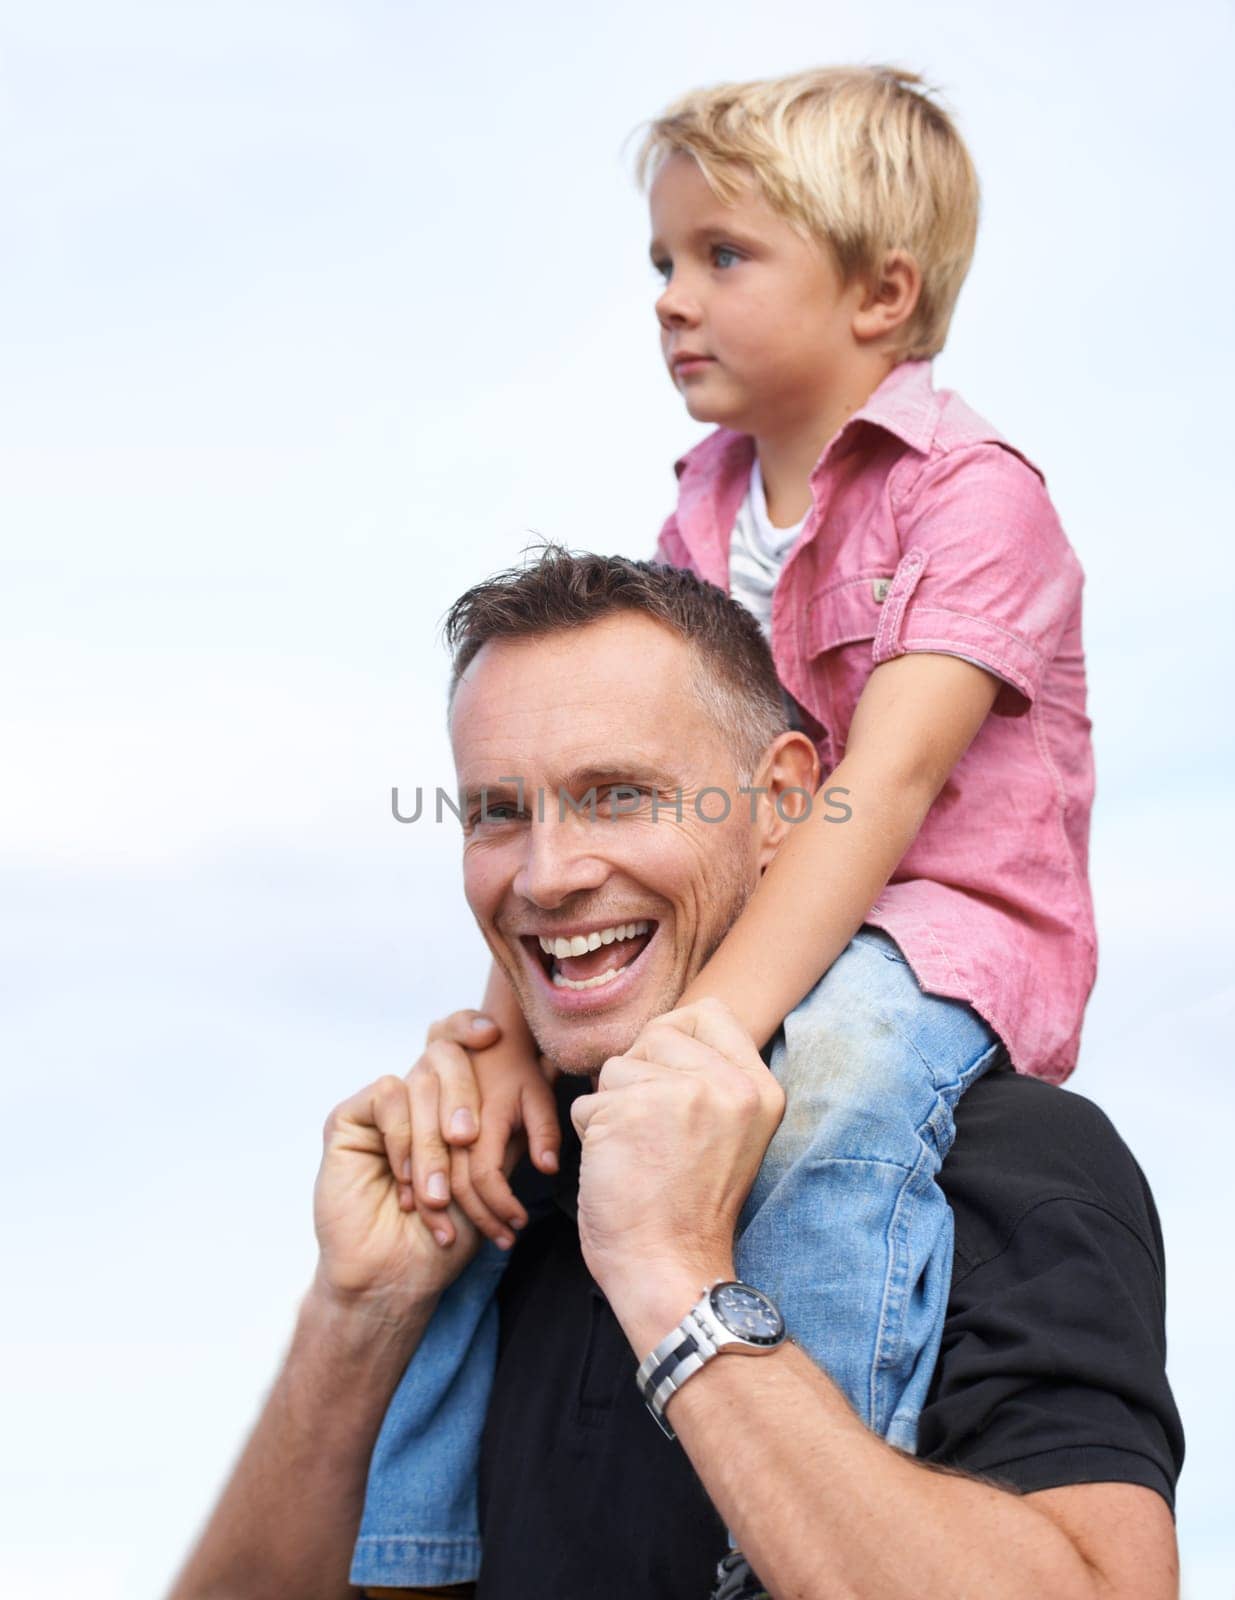 Love, portrait and piggyback by father and son outdoor for fun, bonding or travel adventure. Happy family, support or parent with boy kid outside for shoulder ride, games or care, security or journey.